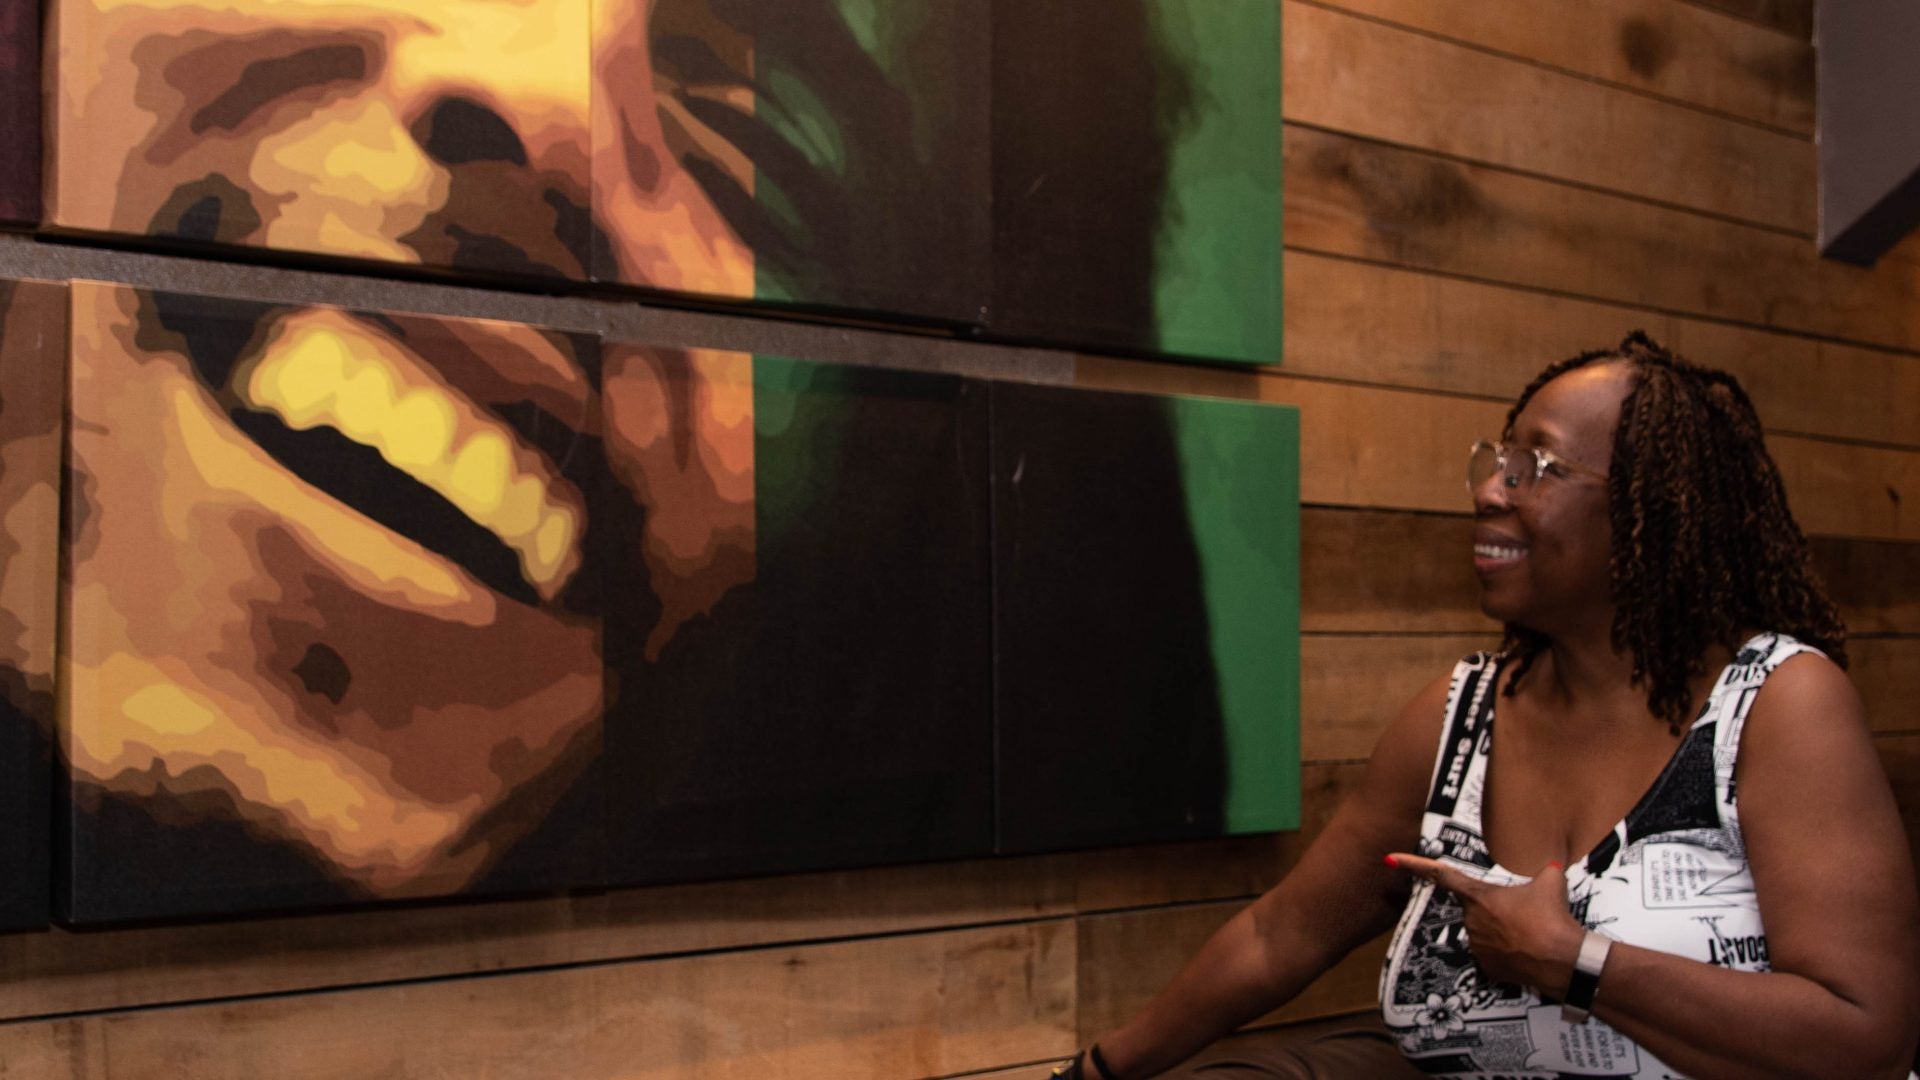 Positive Vibrations And A Celebration Of Bob Marley At Negril’s Azul Beach Resort